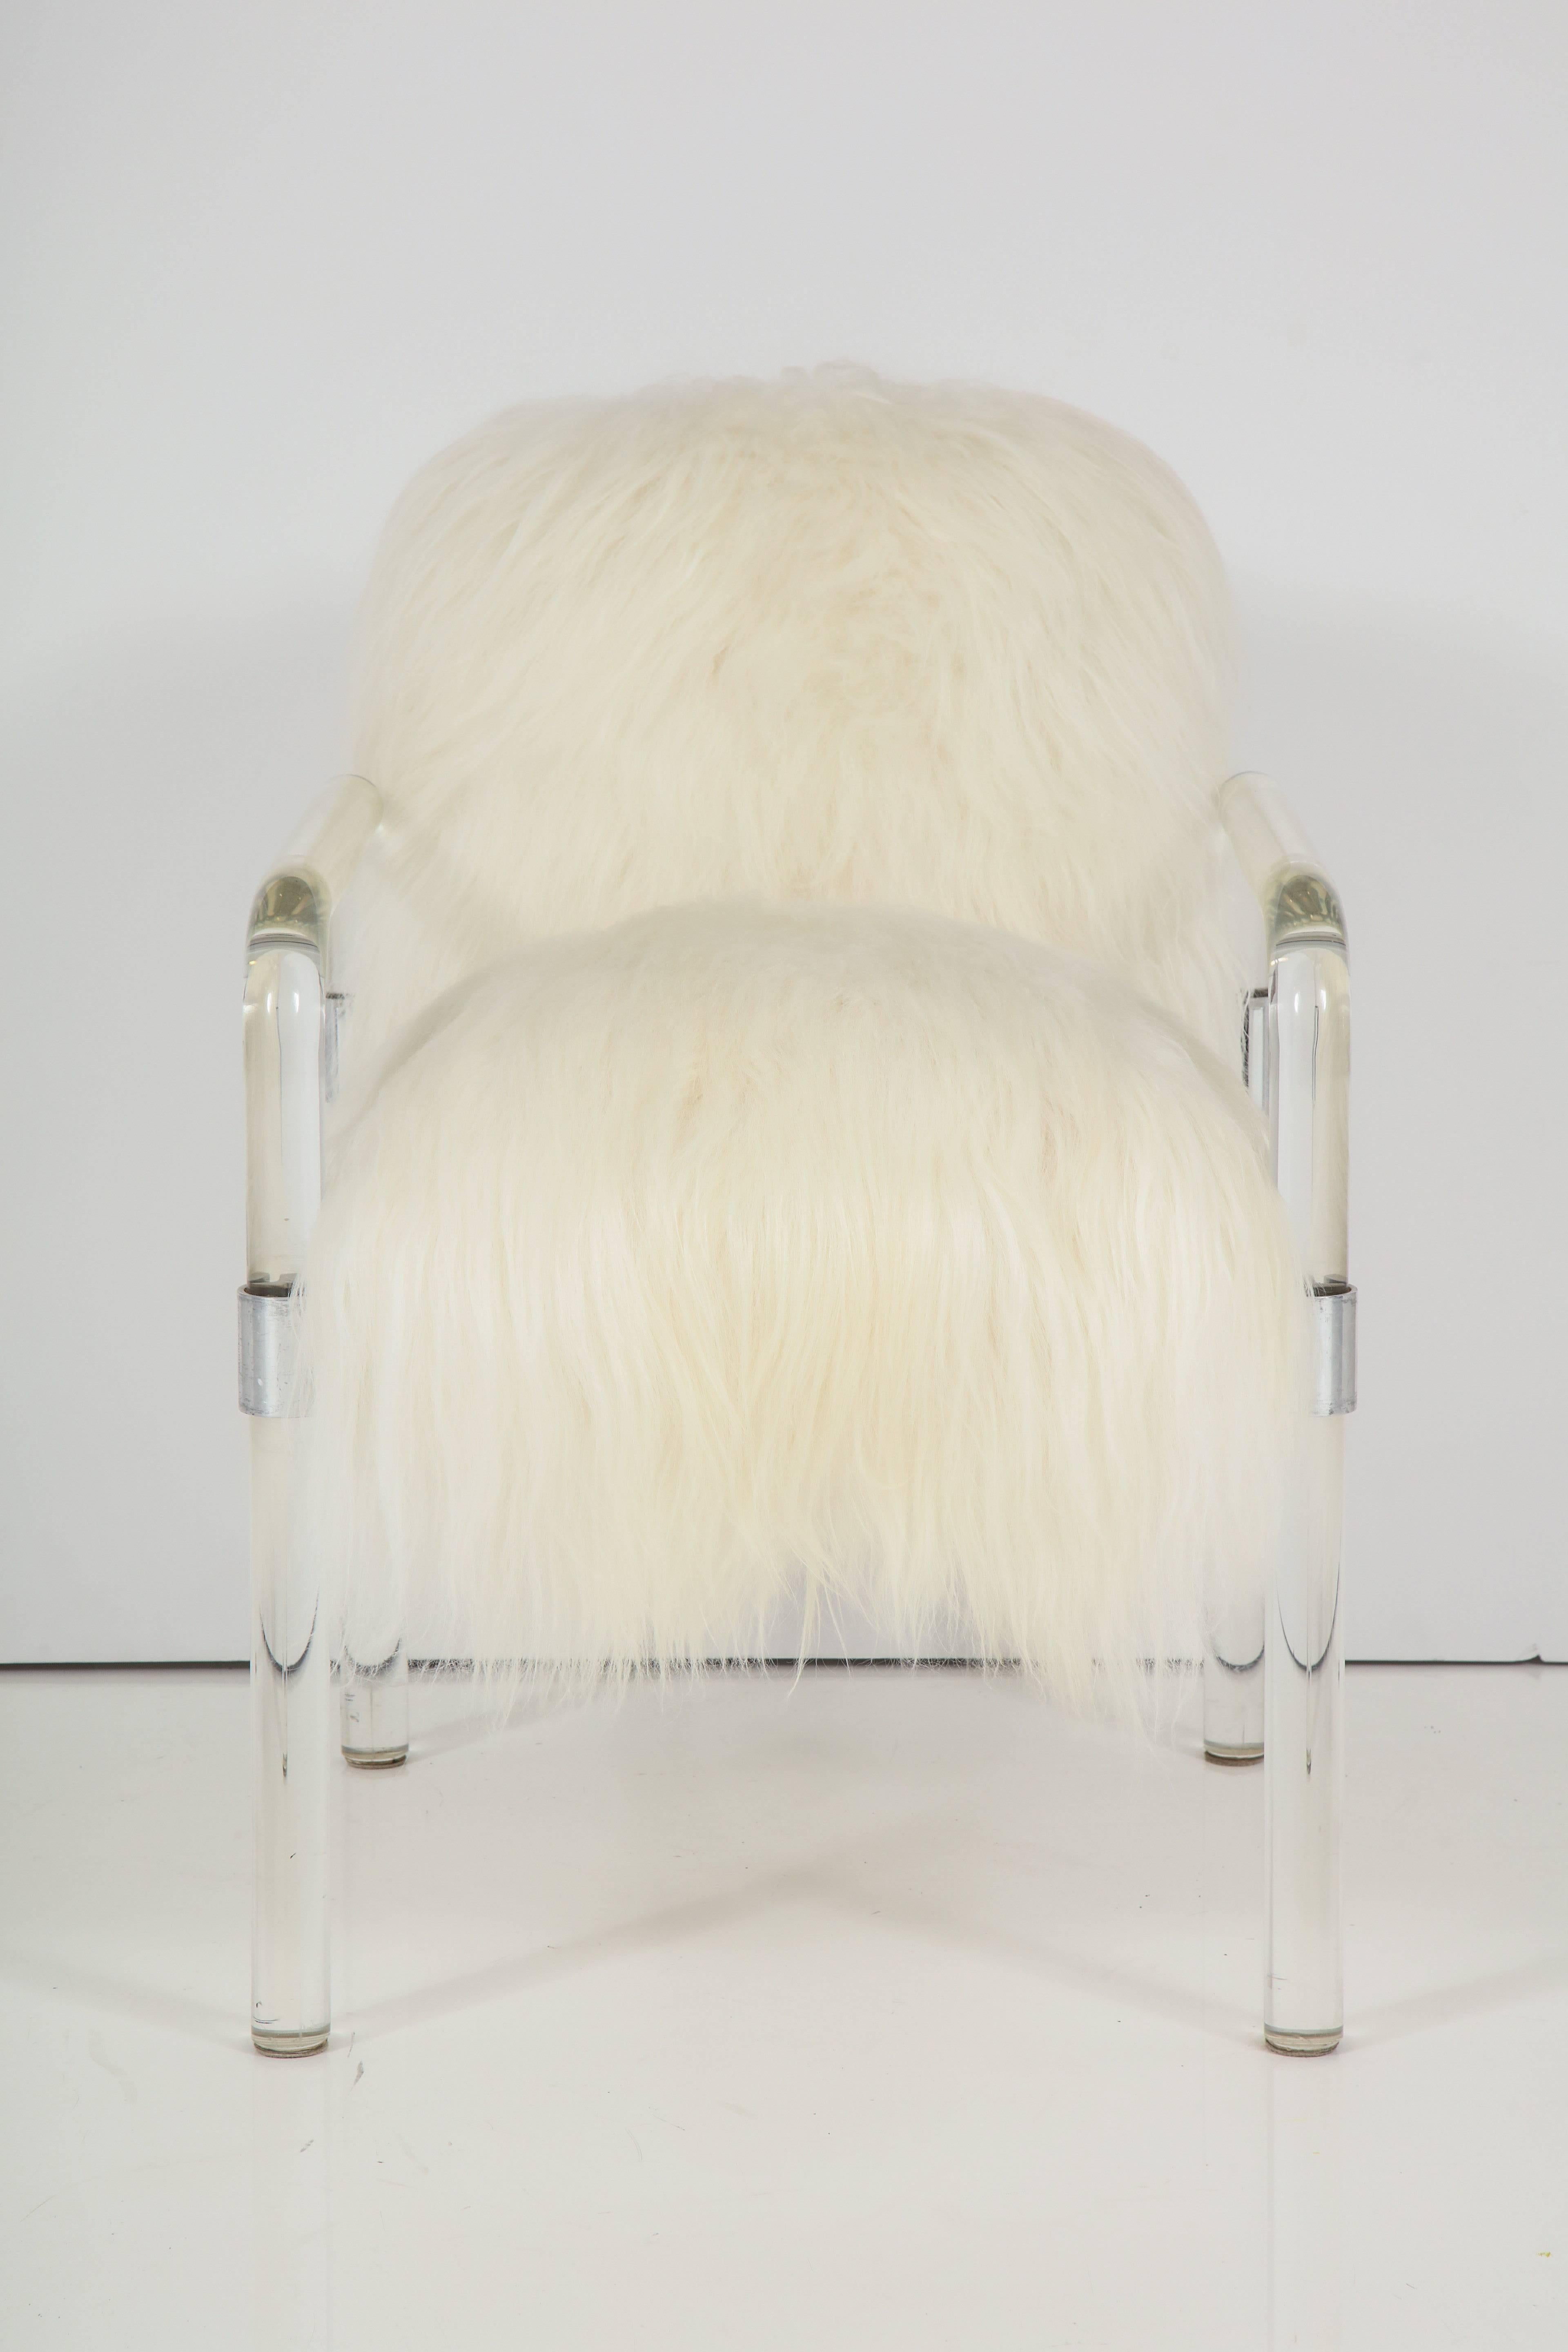 Pipeline series Lucite armchair or desk chair designed by Jeff Messerschmidt in luxurious pure white long hair arctic sheepskin. New upholstery is dense and extremely soft.